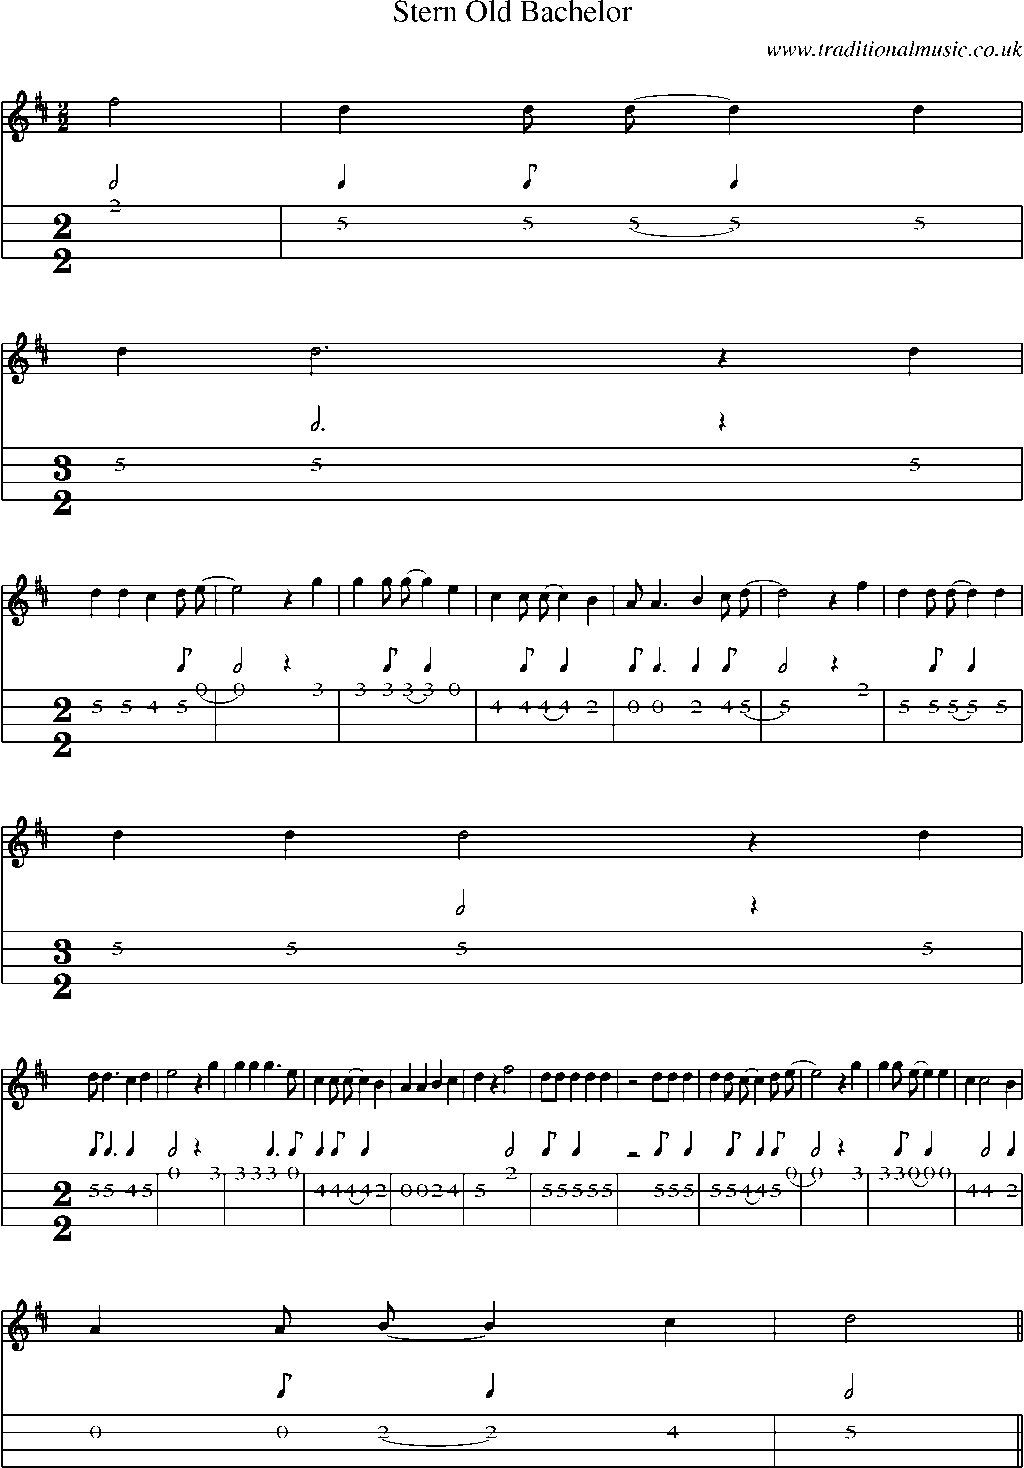 Mandolin Tab and Sheet Music for Stern Old Bachelor